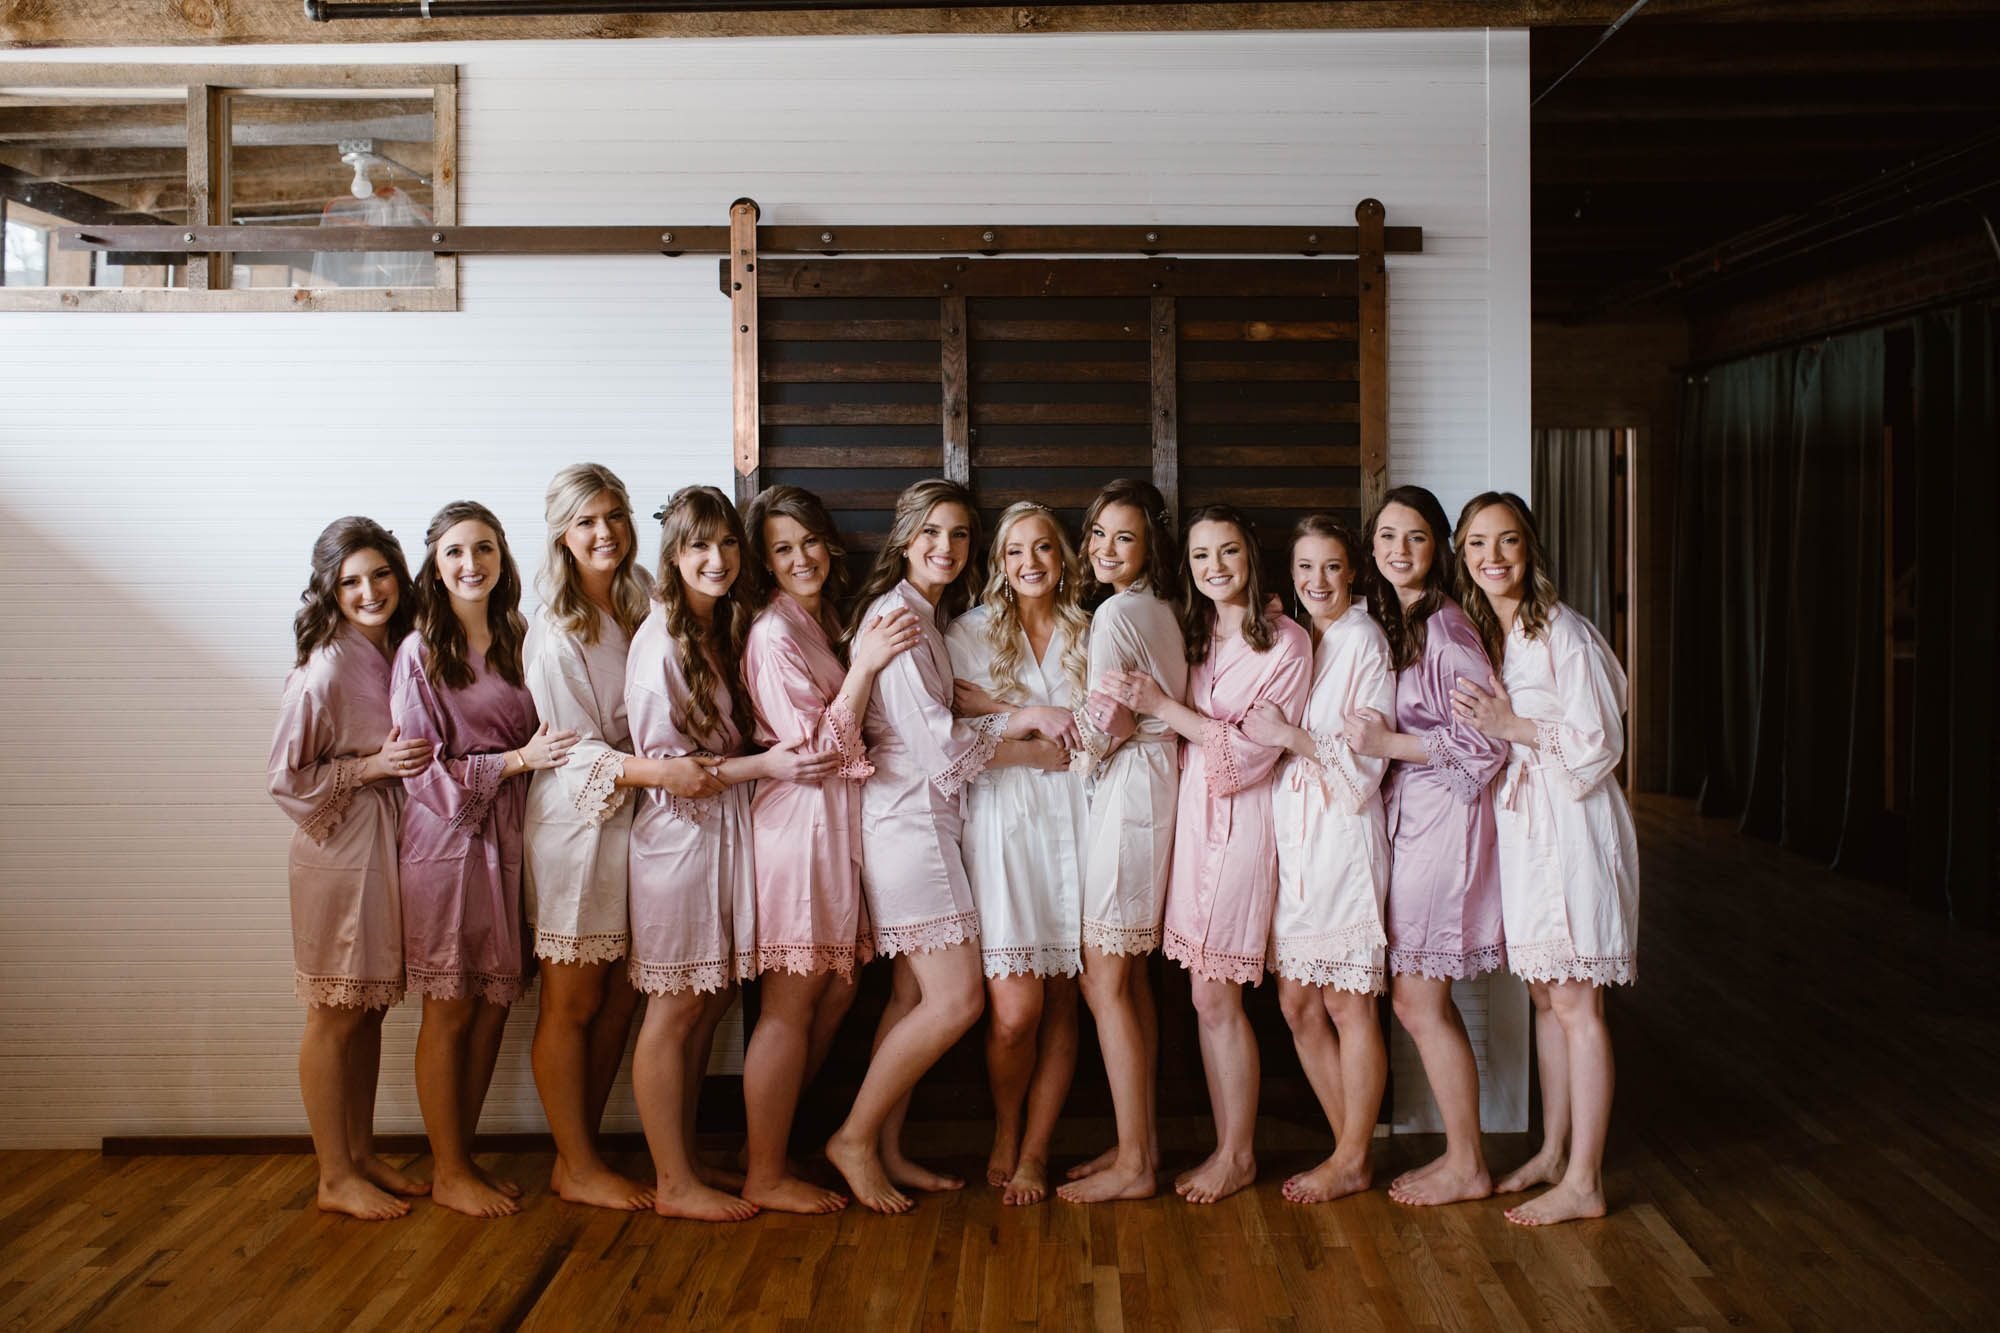 Robe Photos on Wedding Day with Bride and Bridesmaids